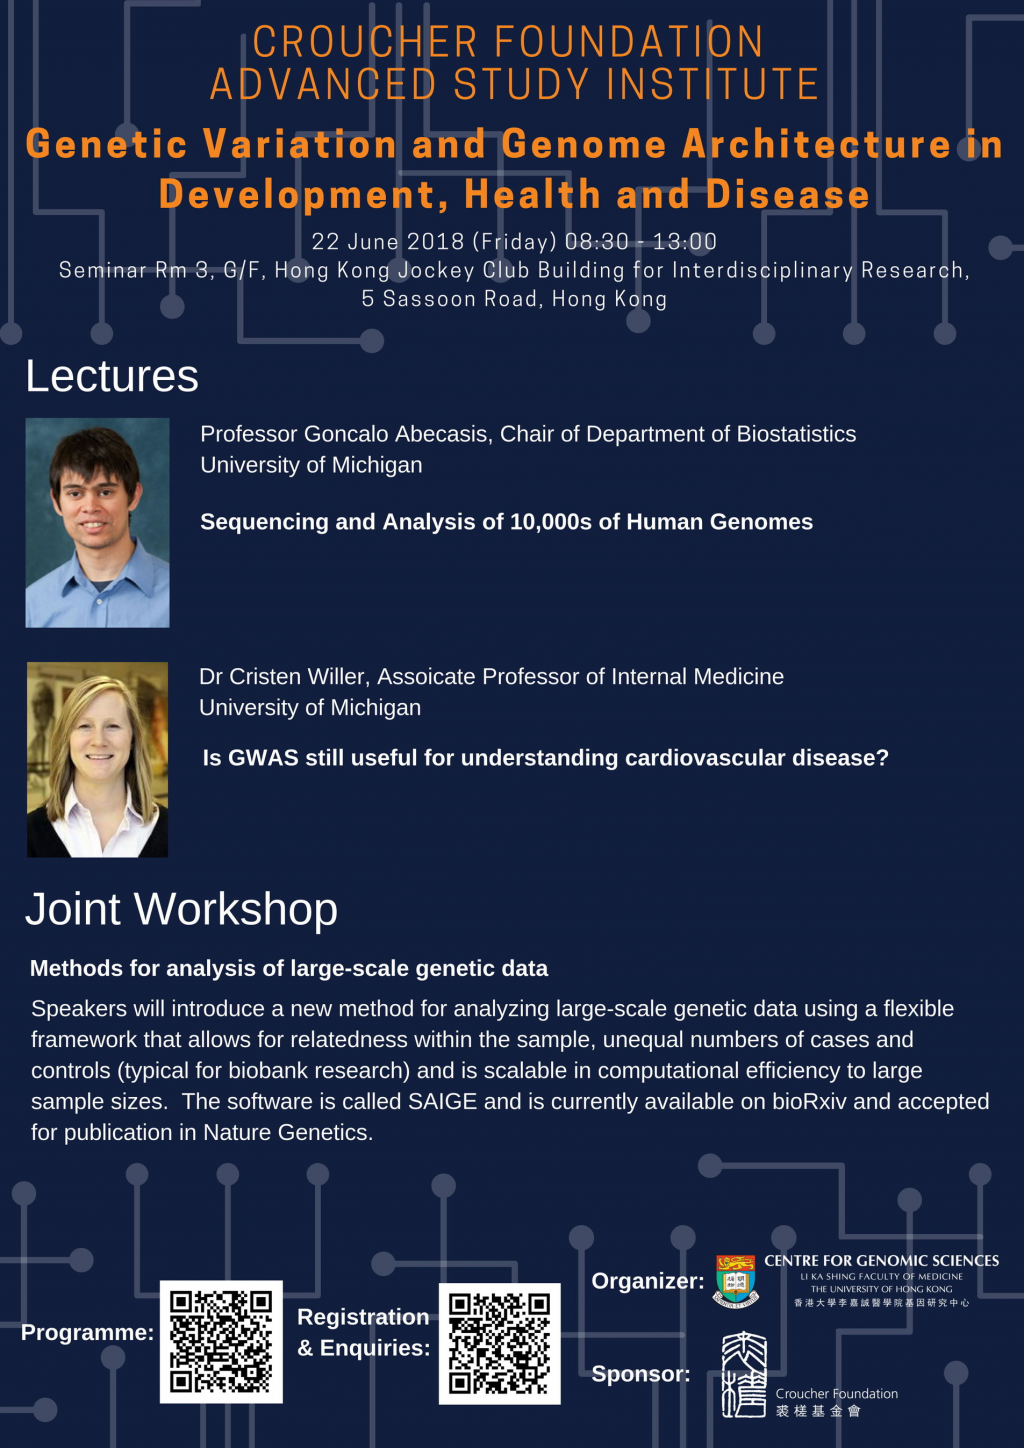 (22 Jun) The Croucher Foundation Advanced Study Institute: Genetic variation and genome architecture in development, health and disease